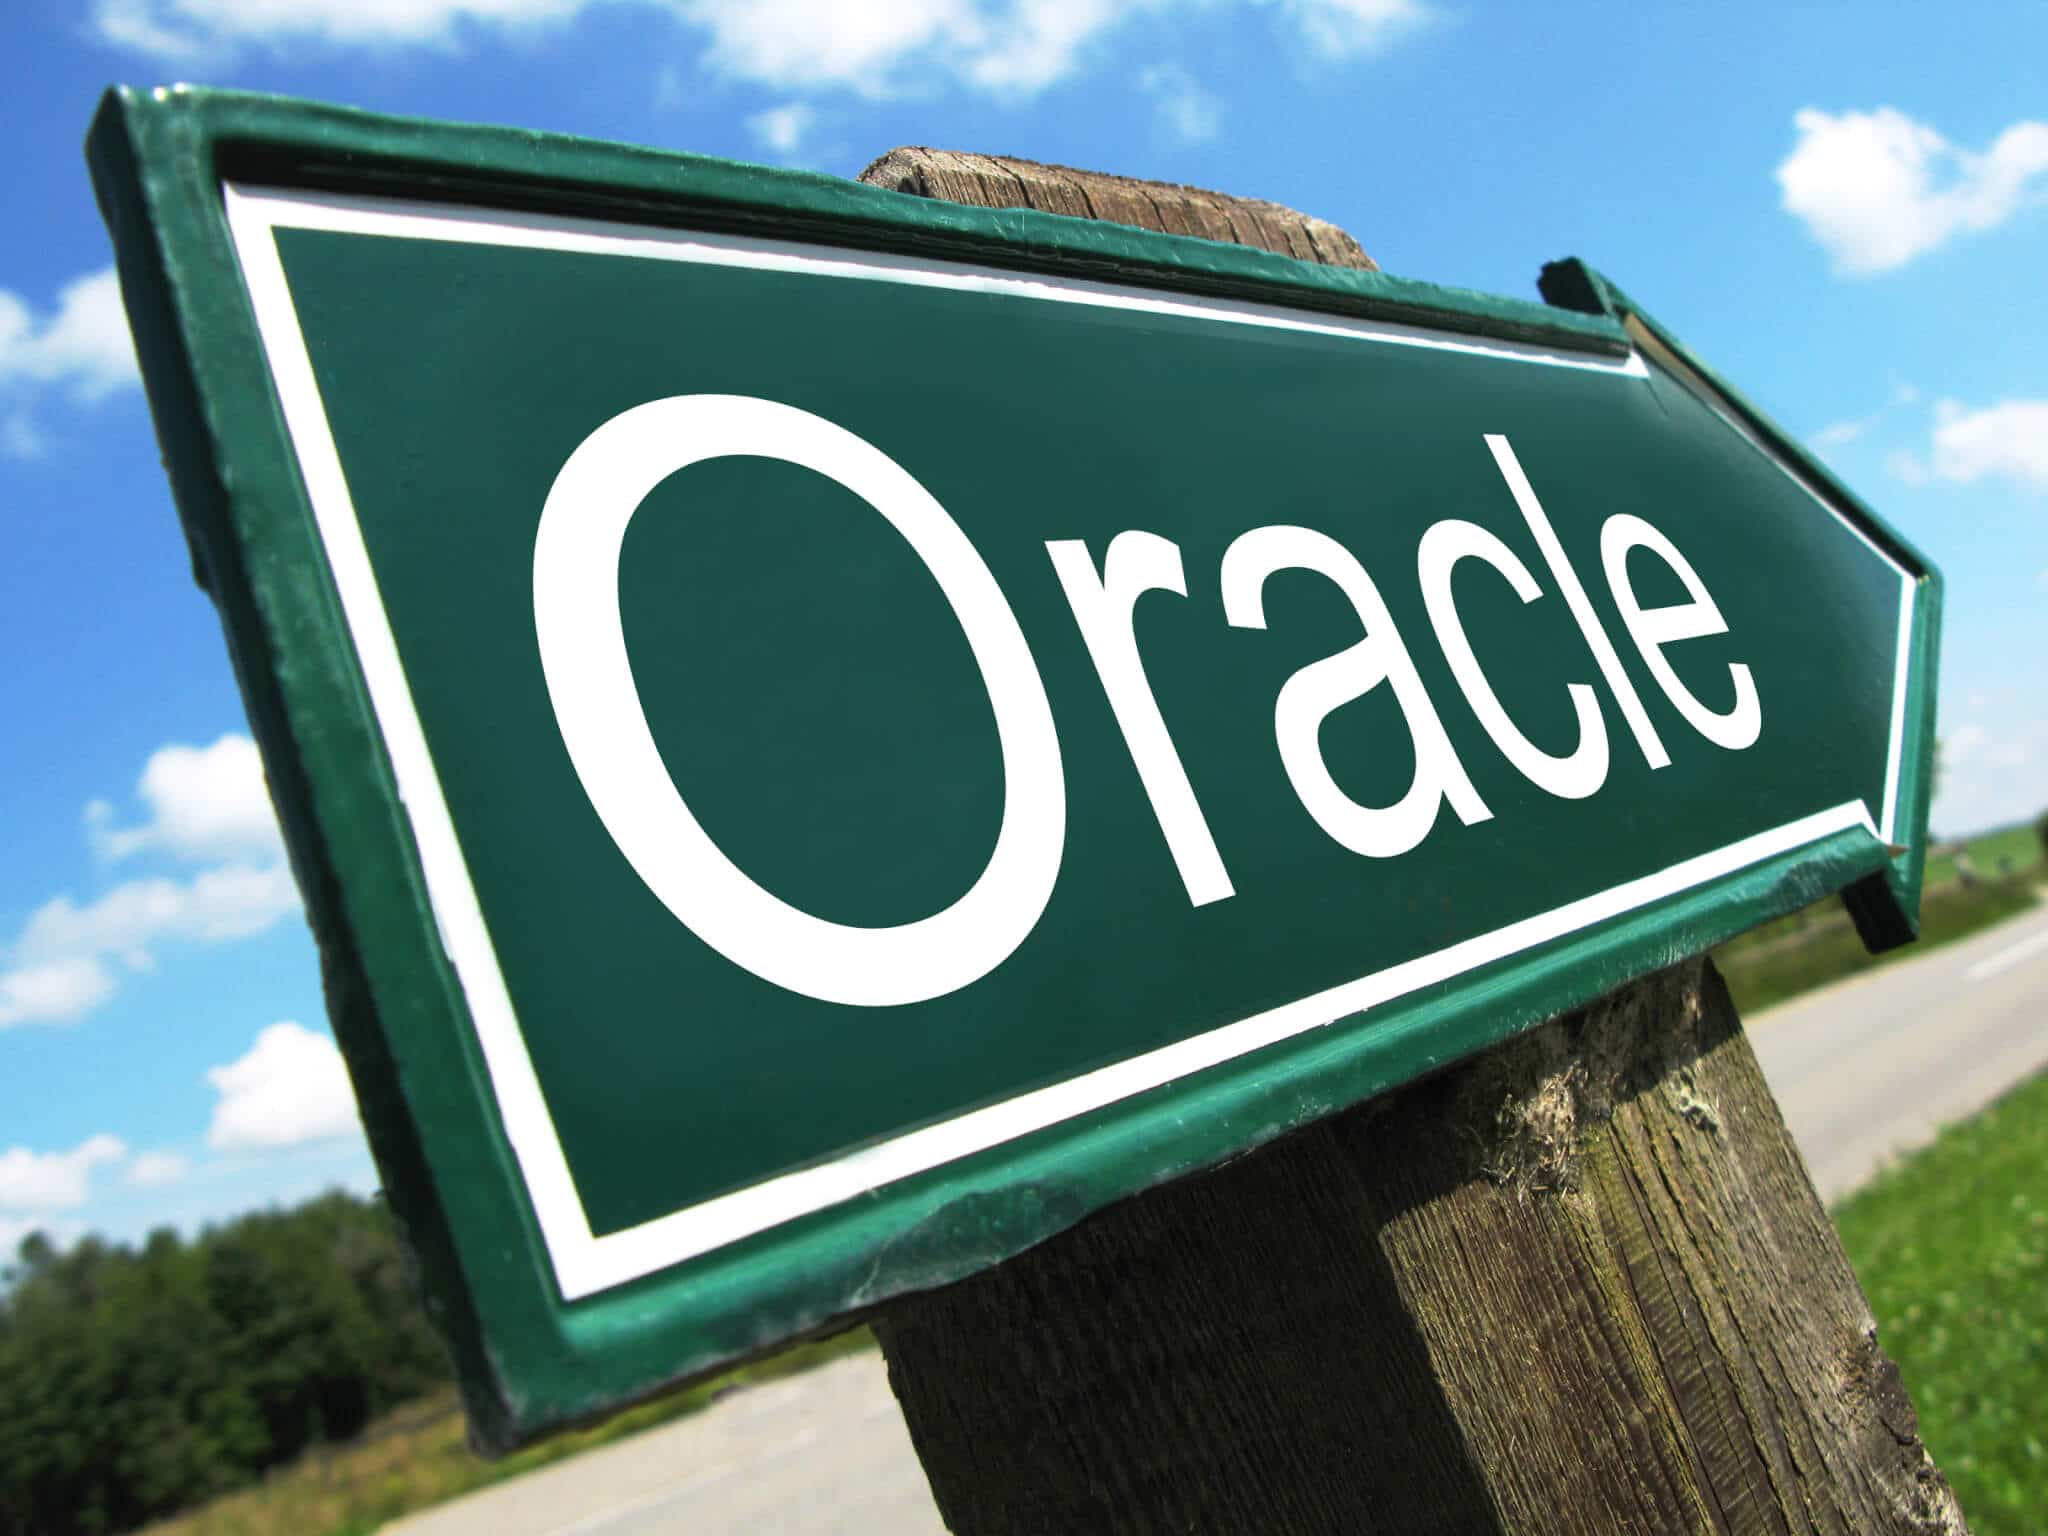 Oracle Signs fortolkning